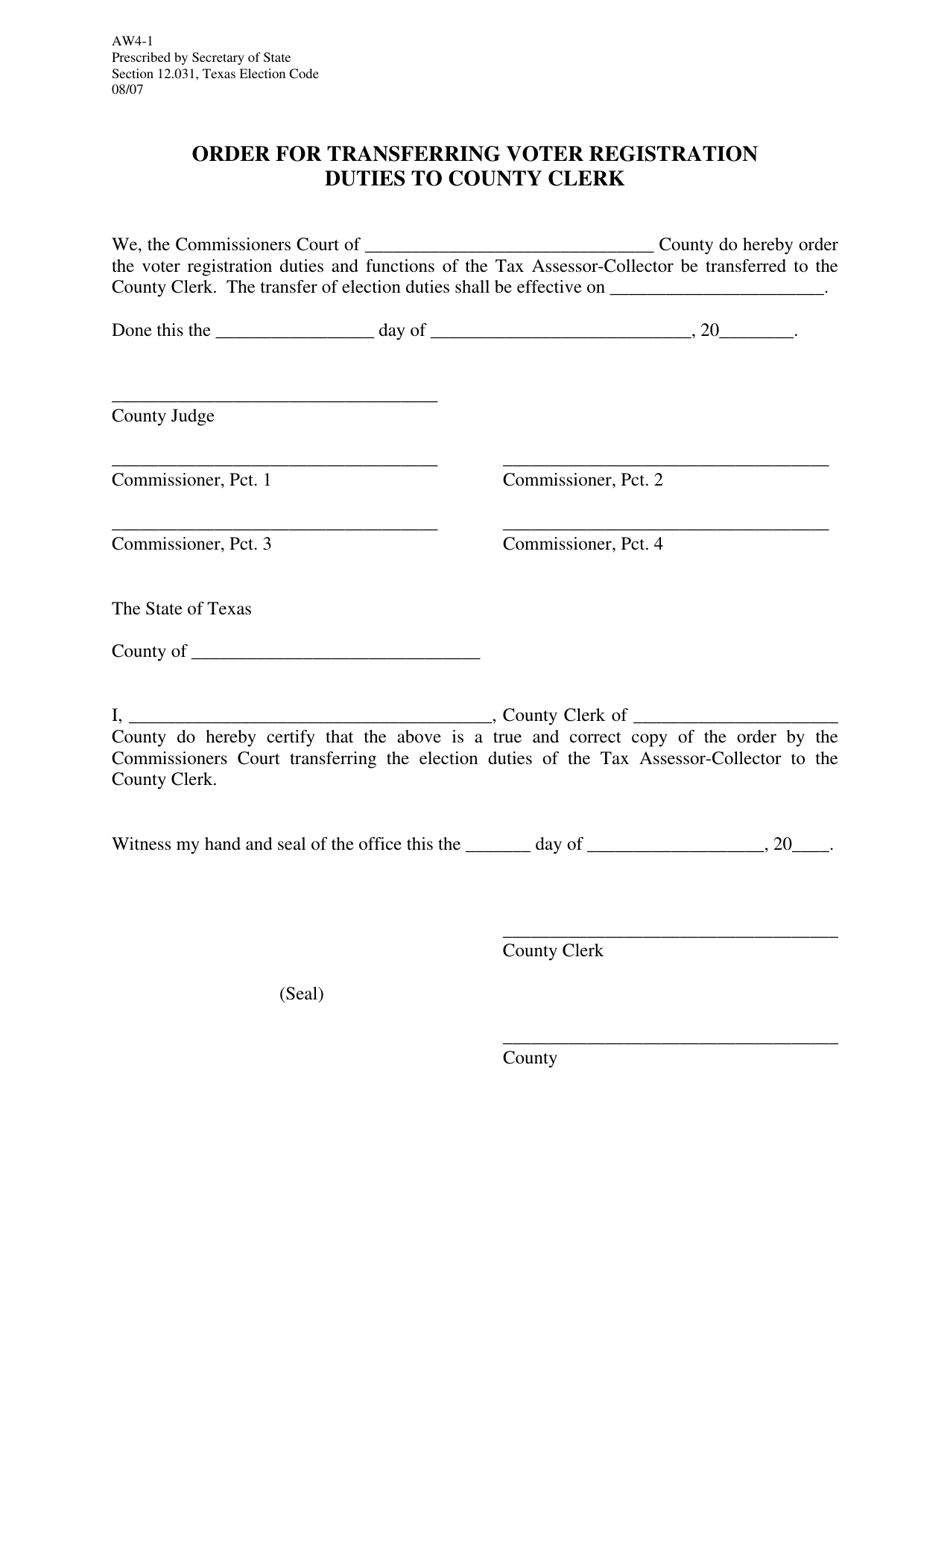 Form AW4-1 Order for Transferring Voter Registration Duties to County Clerk - Texas, Page 1